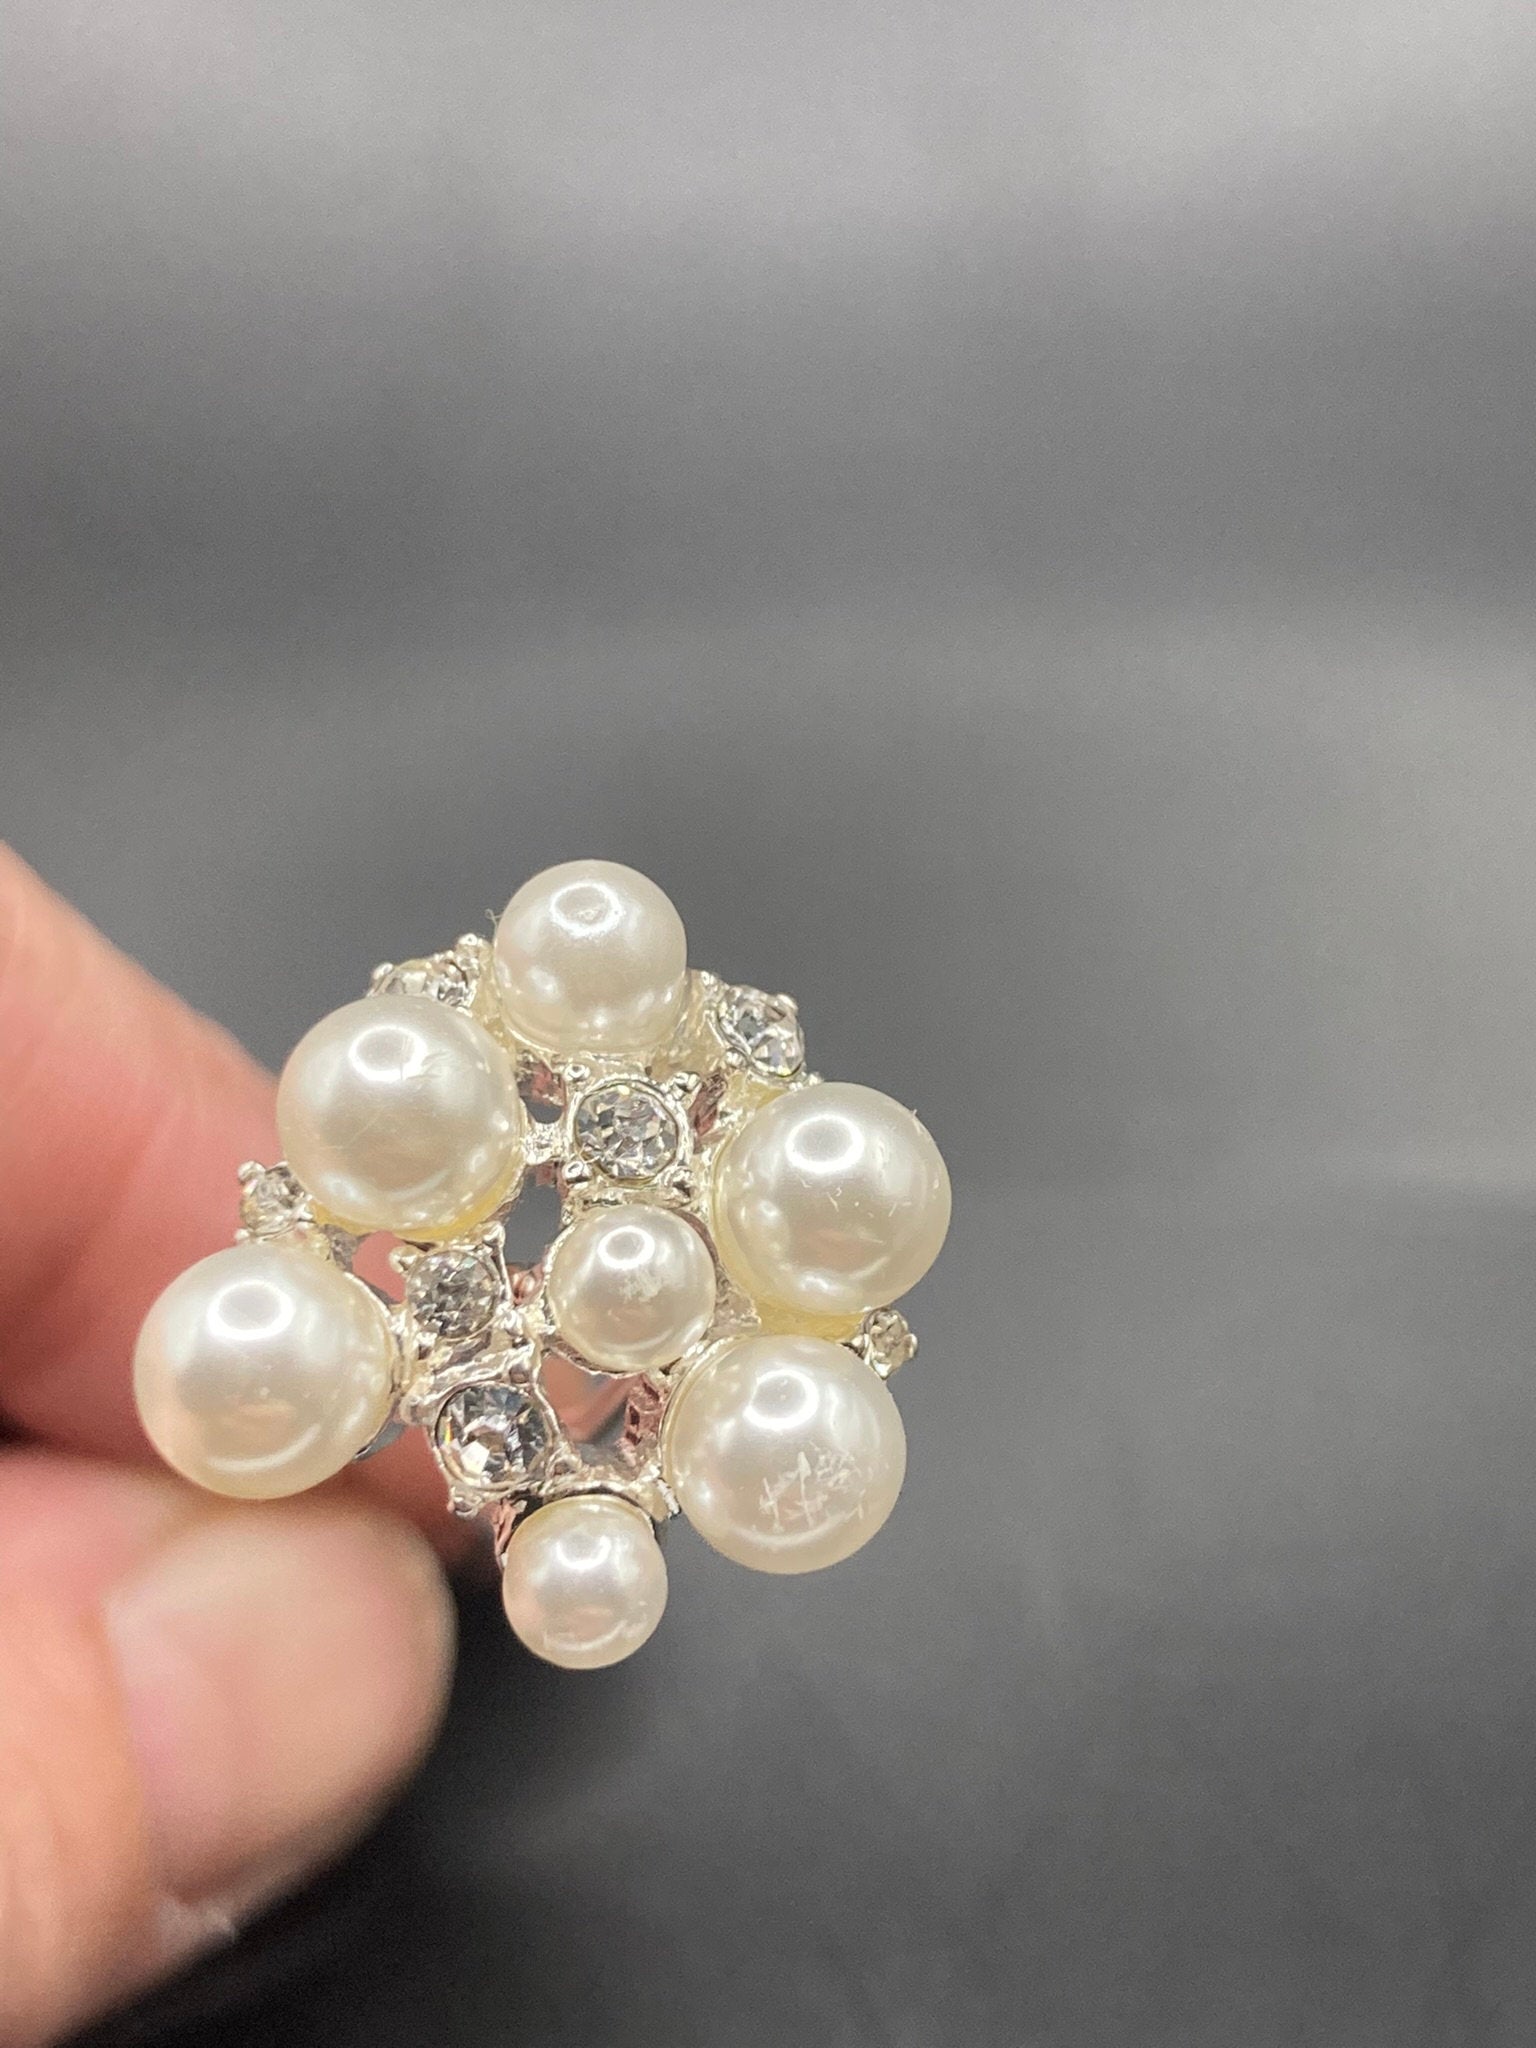 1 x Retro round faux pearl with central diamante clear glass paste silver tone hair pin